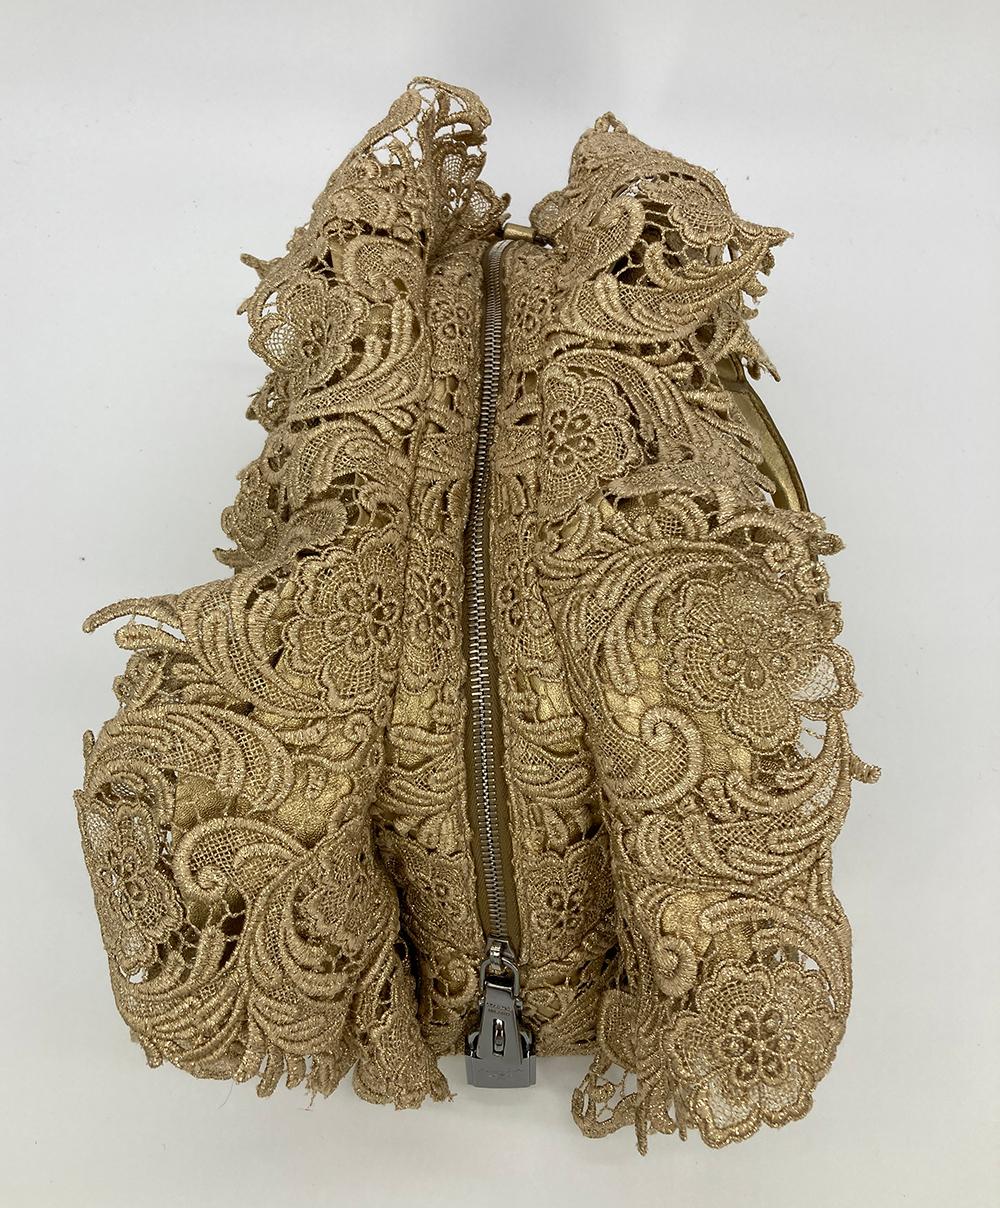 Prada Gold Leather and Lace Pizzo bag In Excellent Condition For Sale In Philadelphia, PA